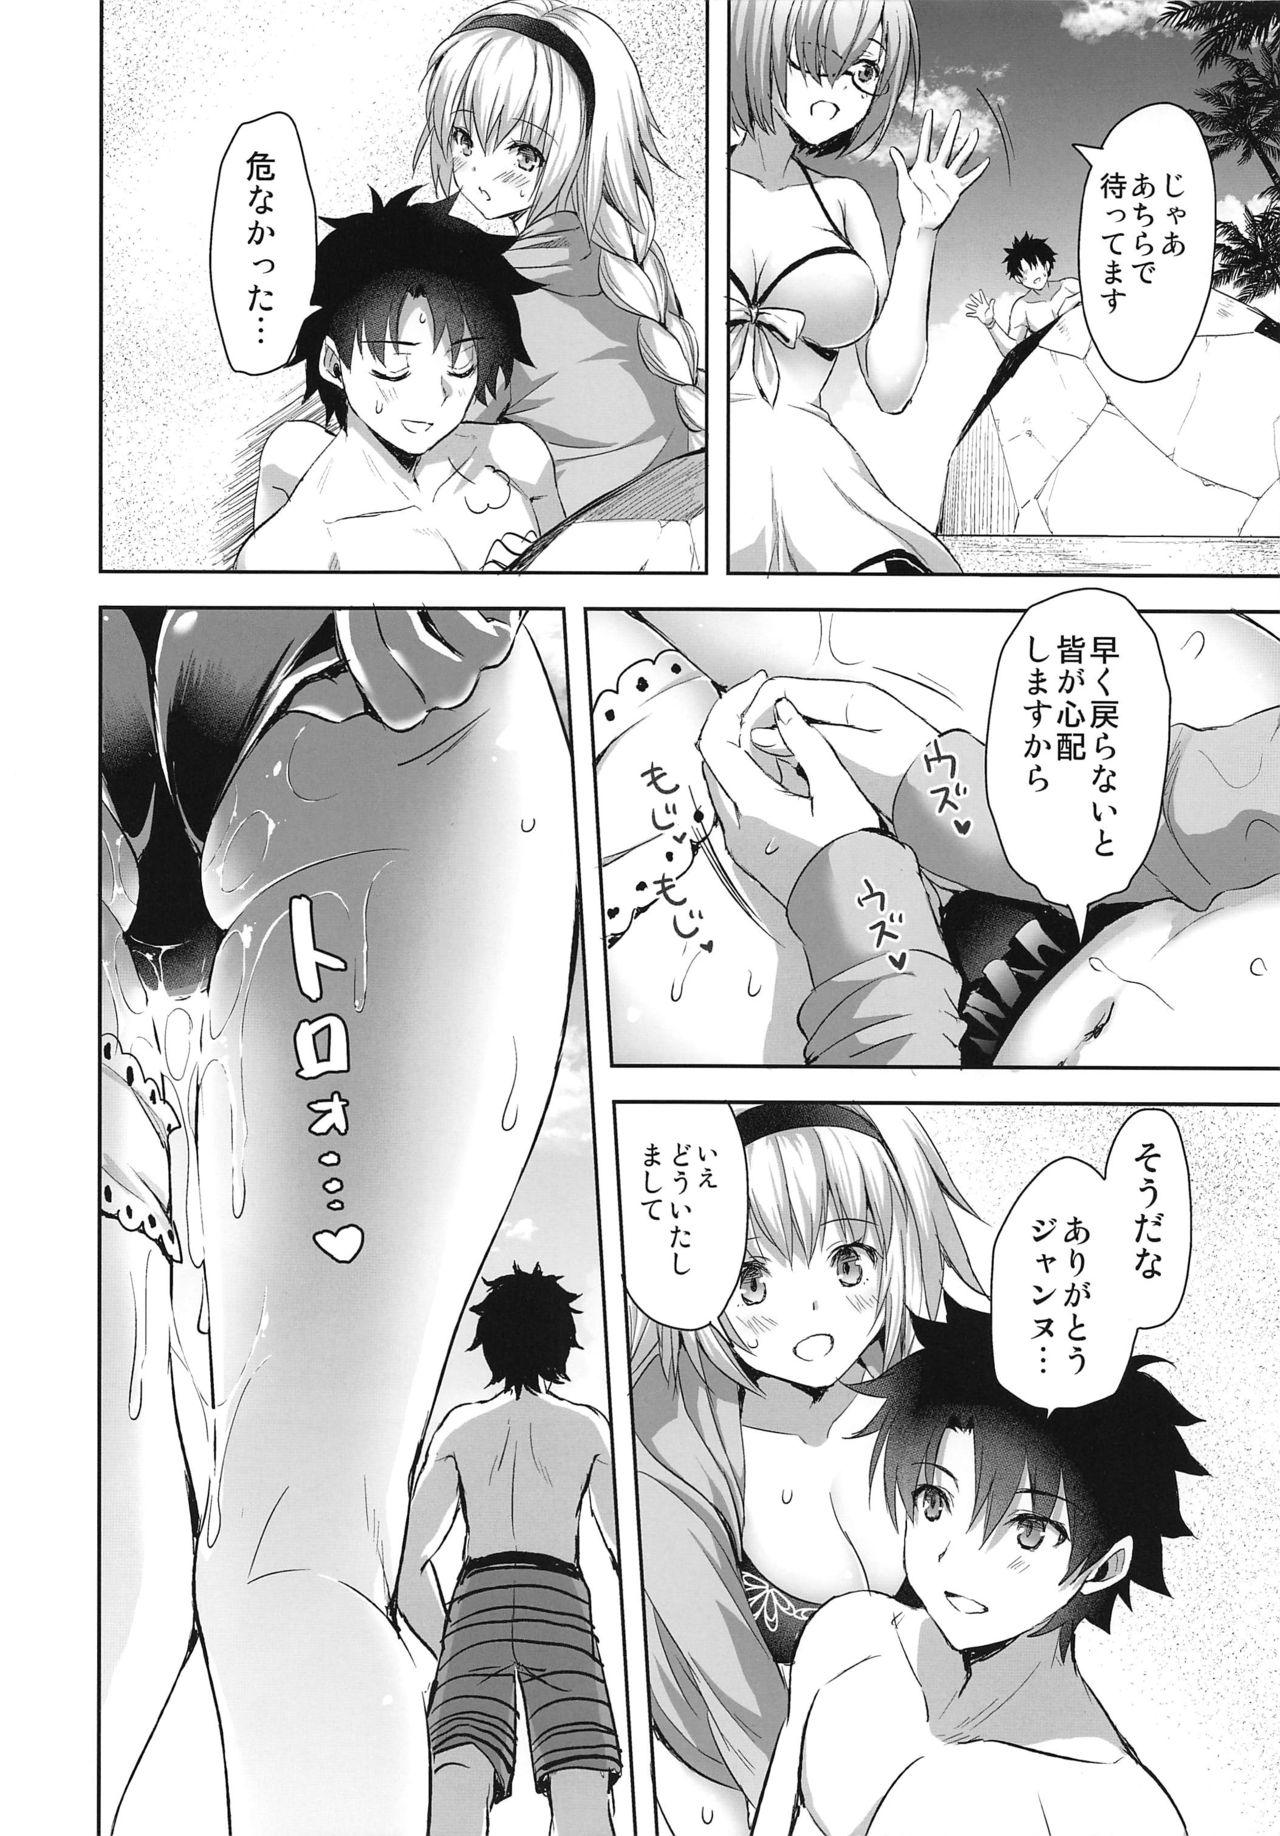 Banging Jeanne in Summer - Fate grand order Deep Throat - Page 13